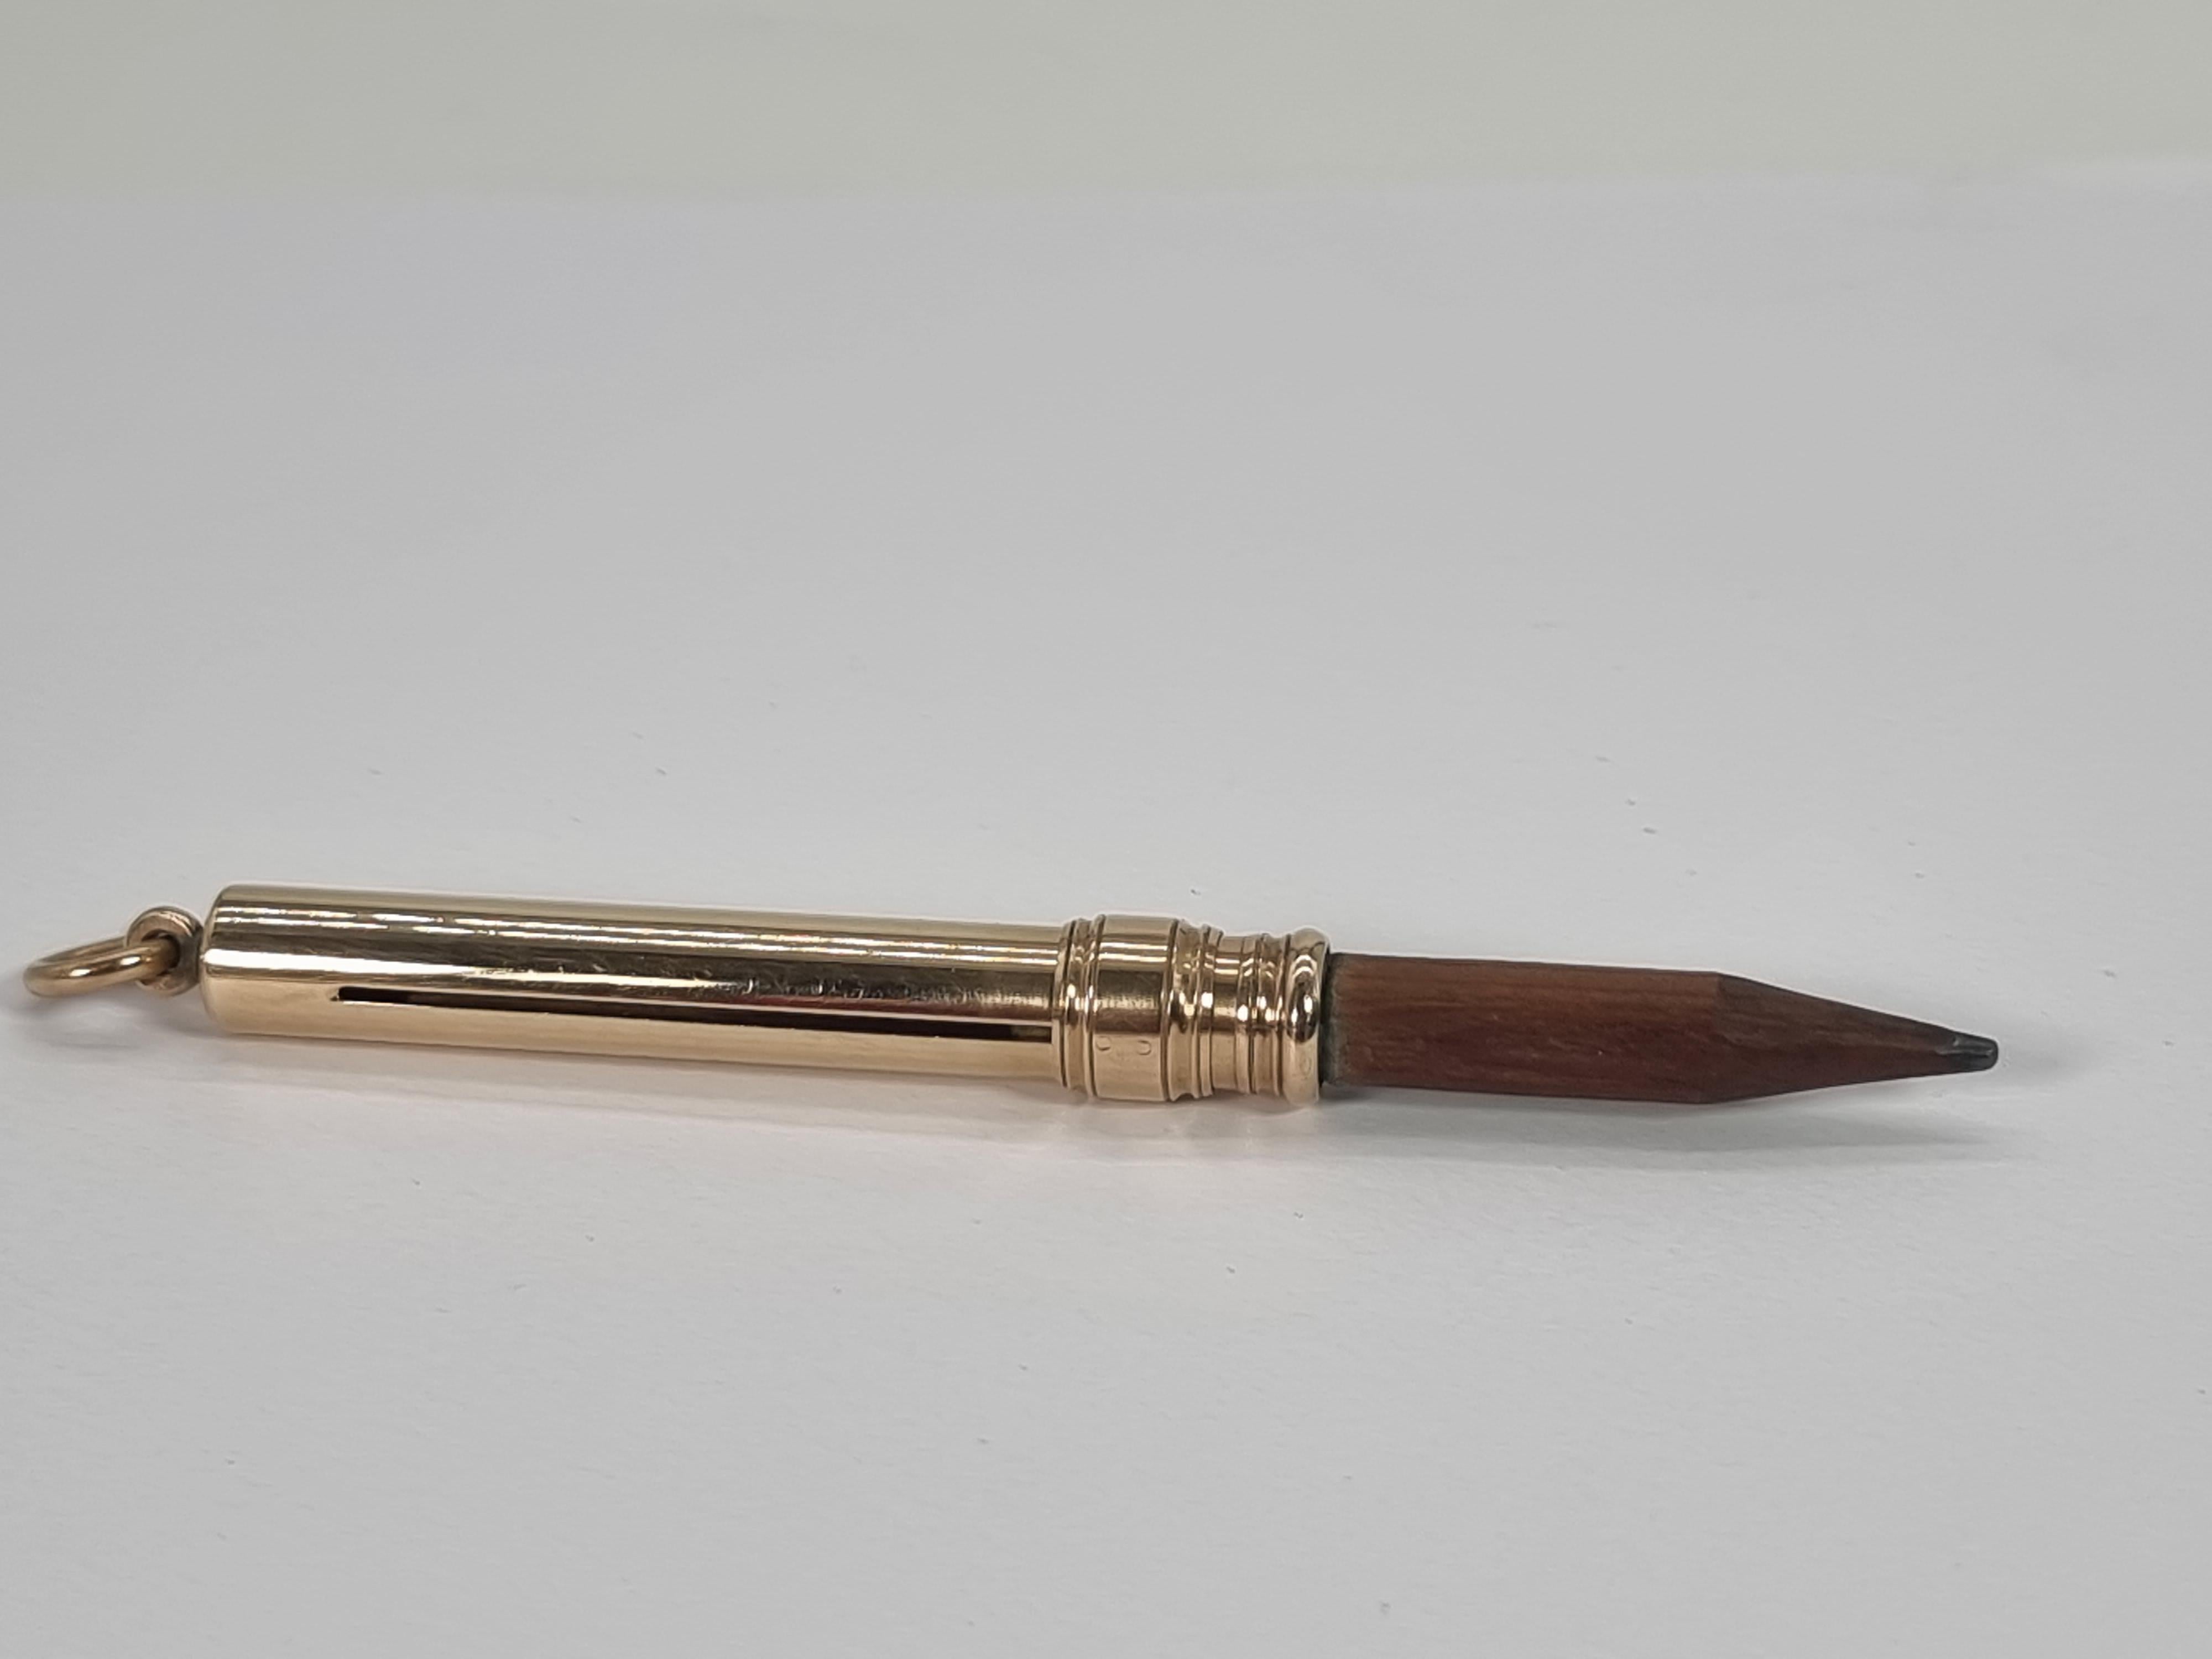 This very fine example of a gold sliding pencil was produced by the top English pen and pencil manufacturer Mordan and Co and bears their name on its stem with the factory arrow mark which indicates it is made from gold at least 10cts in